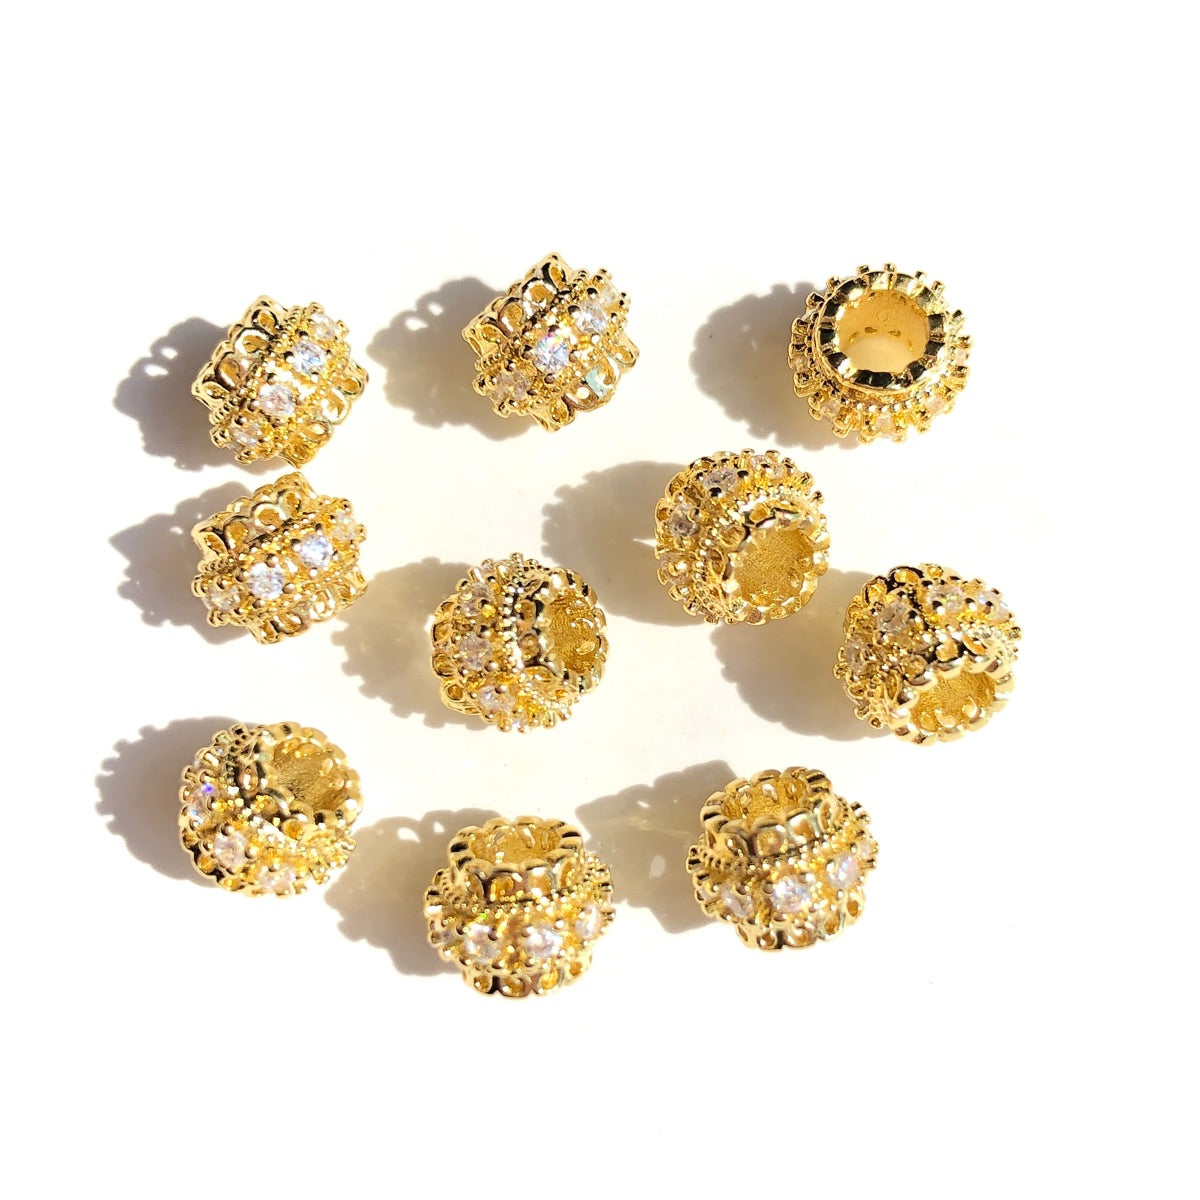 10-20-50pcs/lot CZ Paved Rondelle Wheel Spacers Gold CZ Paved Spacers Big Hole Beads New Spacers Arrivals Rondelle Beads Wholesale Charms Beads Beyond